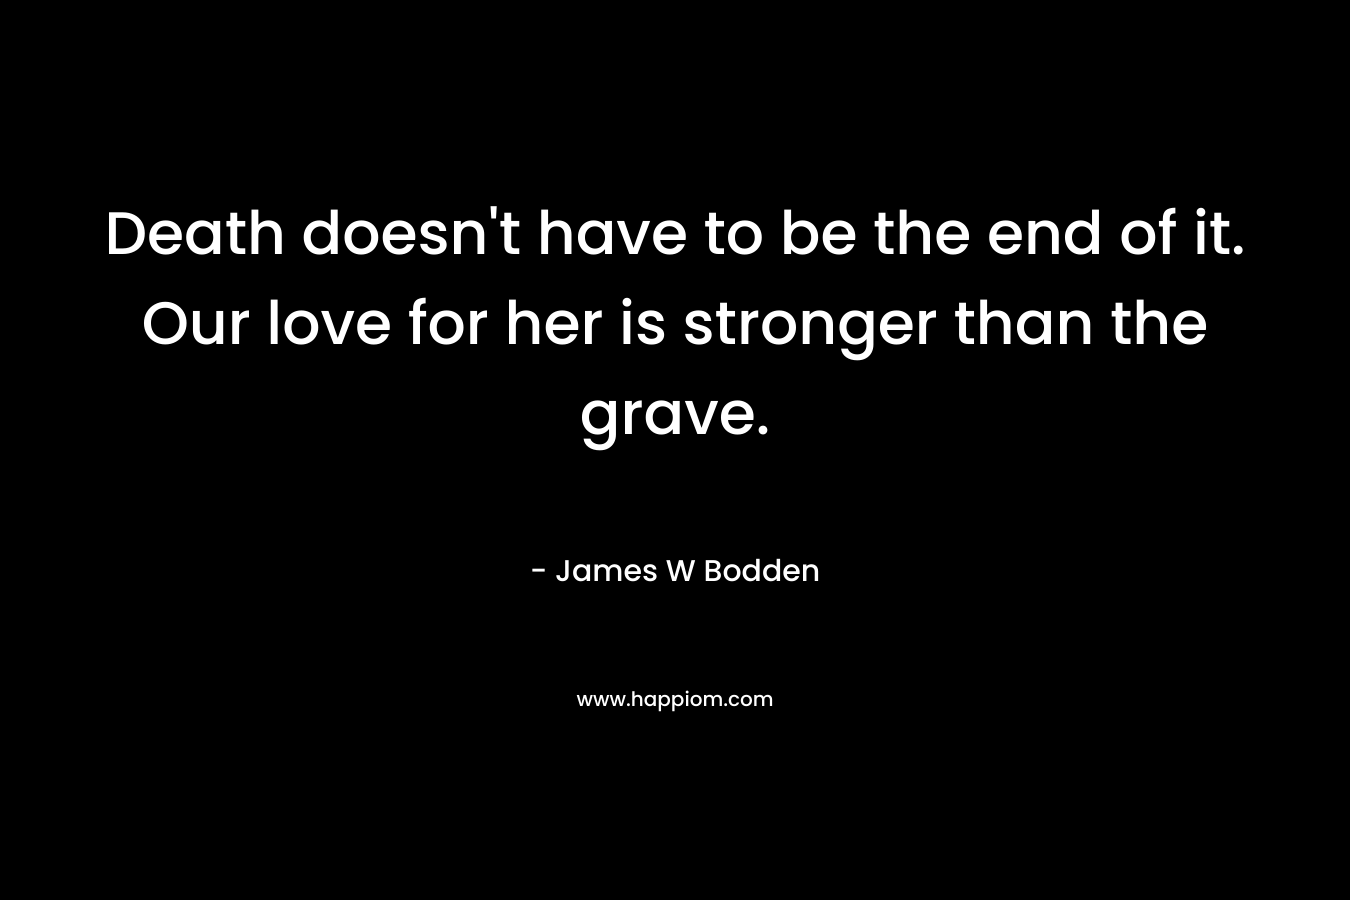 Death doesn’t have to be the end of it. Our love for her is stronger than the grave. – James W Bodden